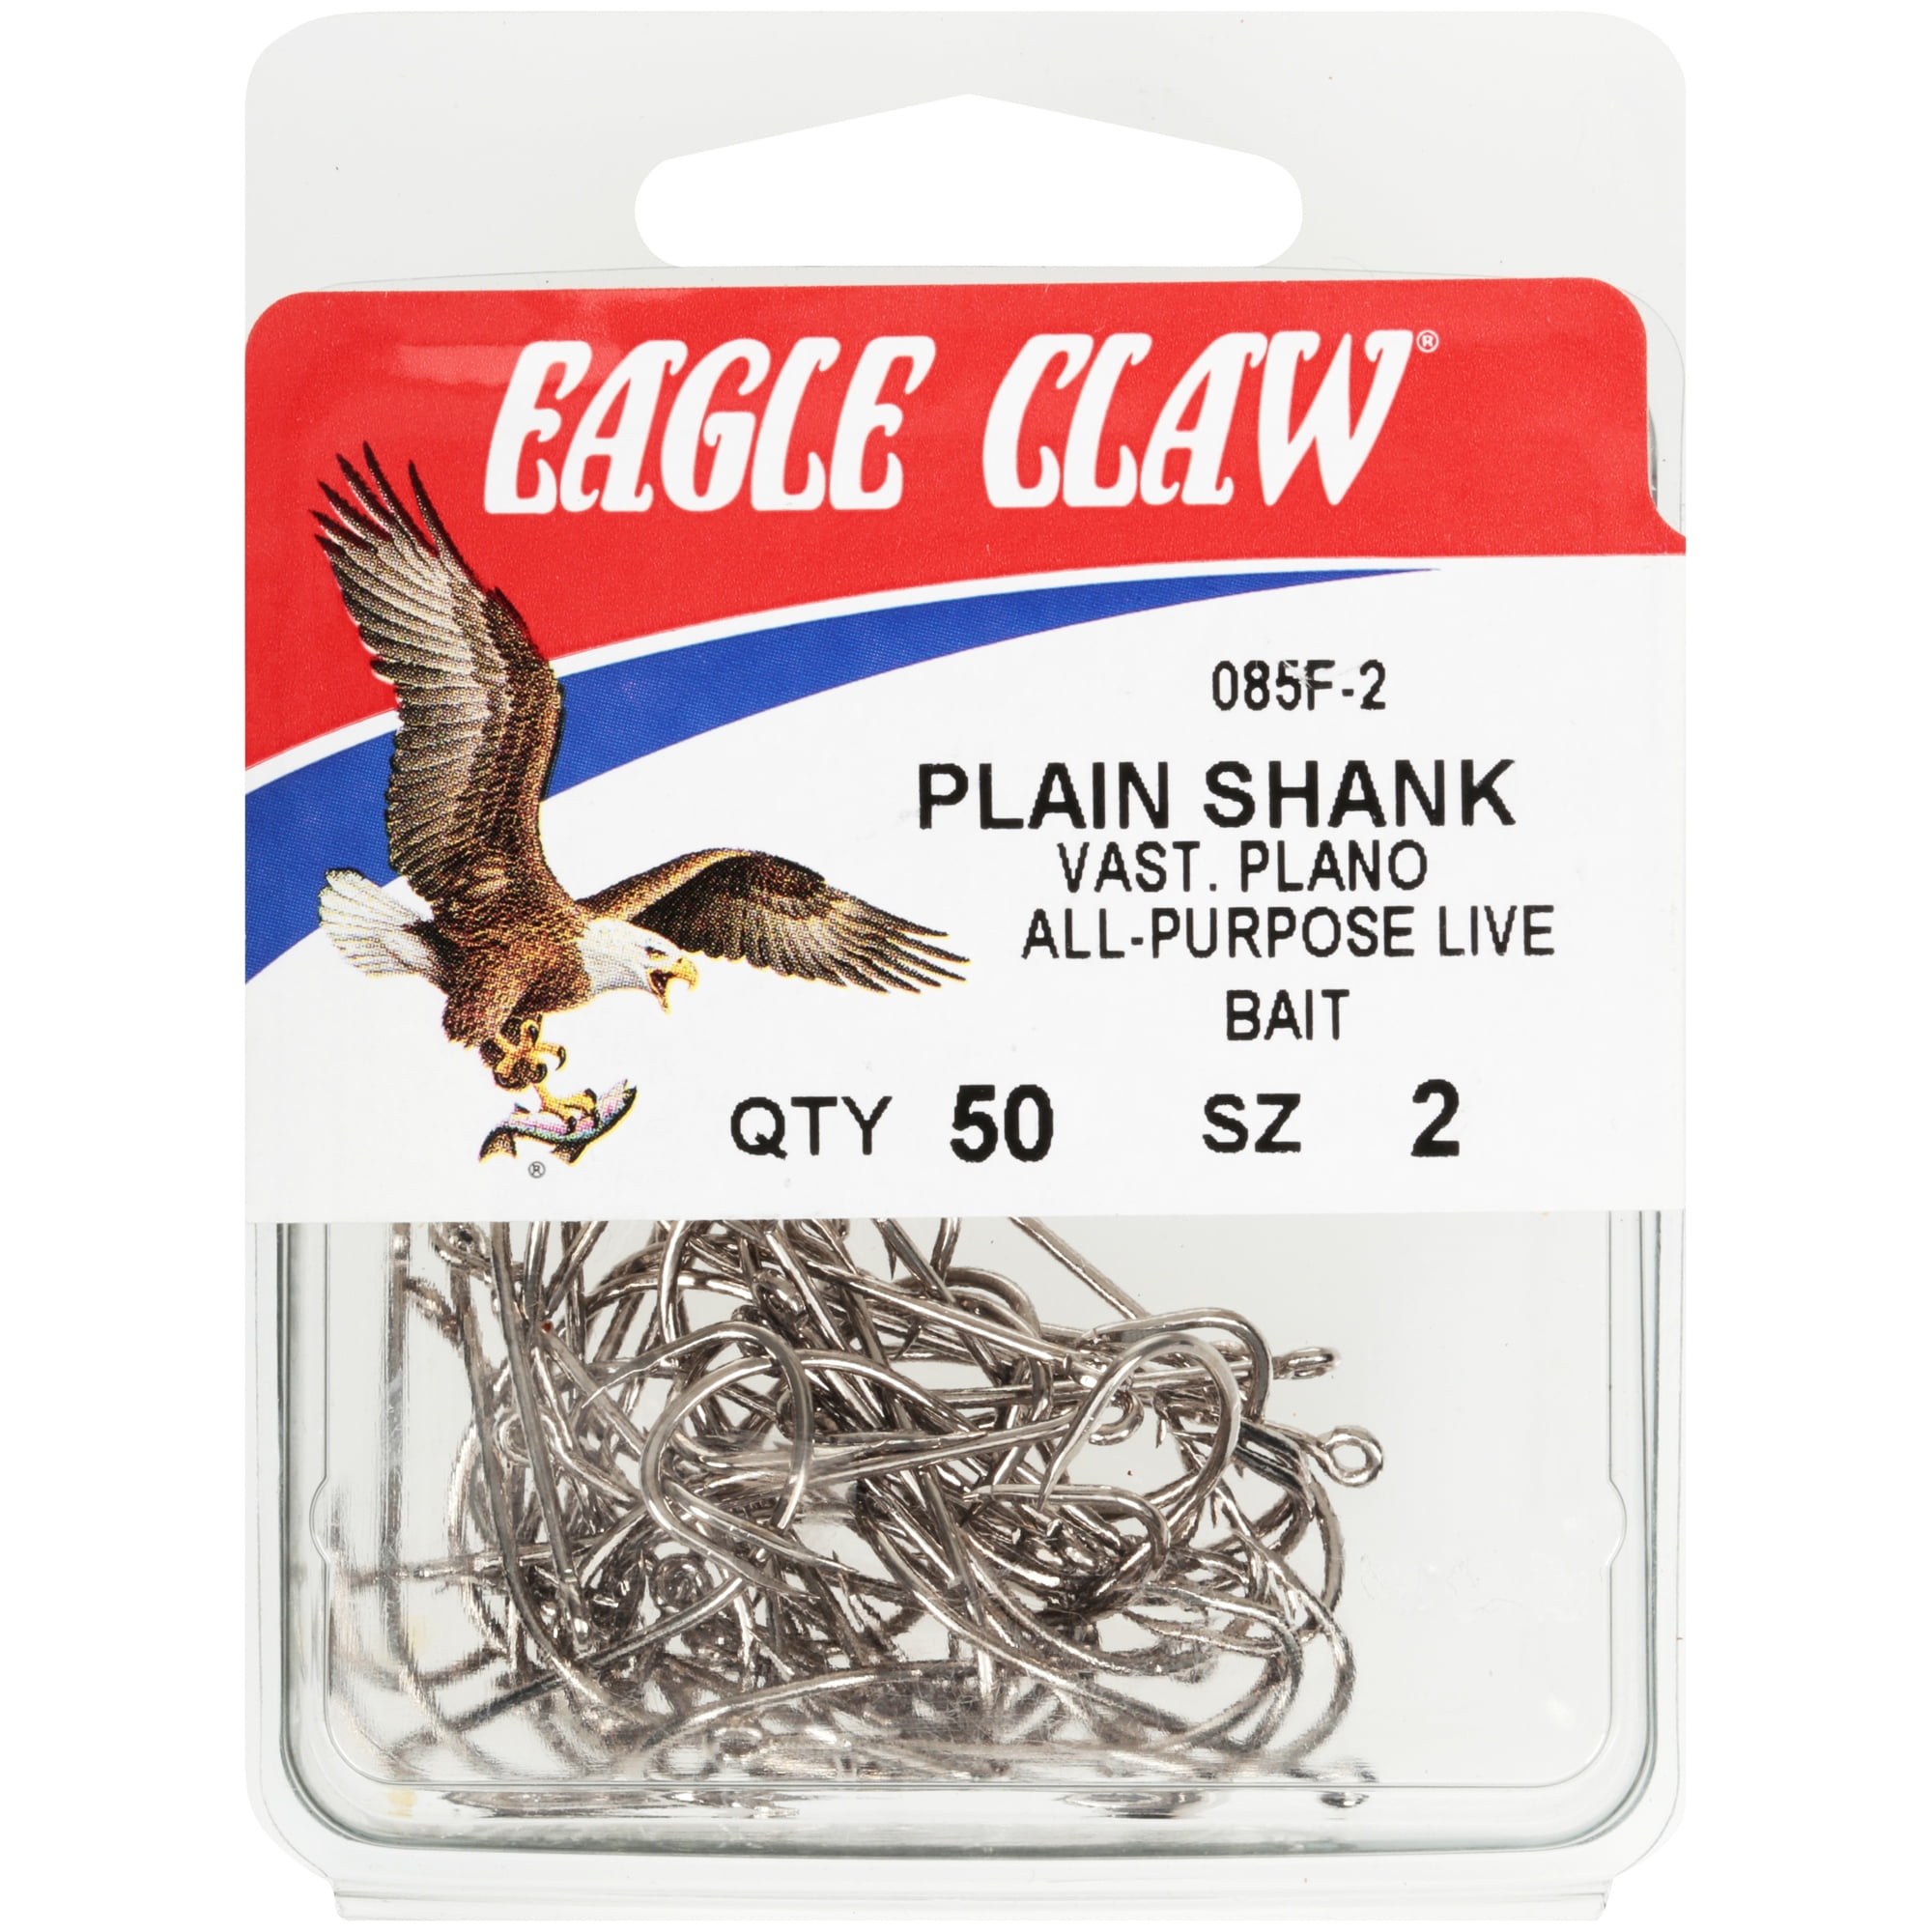 2 Eagle Claw Zip Closure Fishing License Holders Sealed Permit Cases AFLHZ  - Tuwa